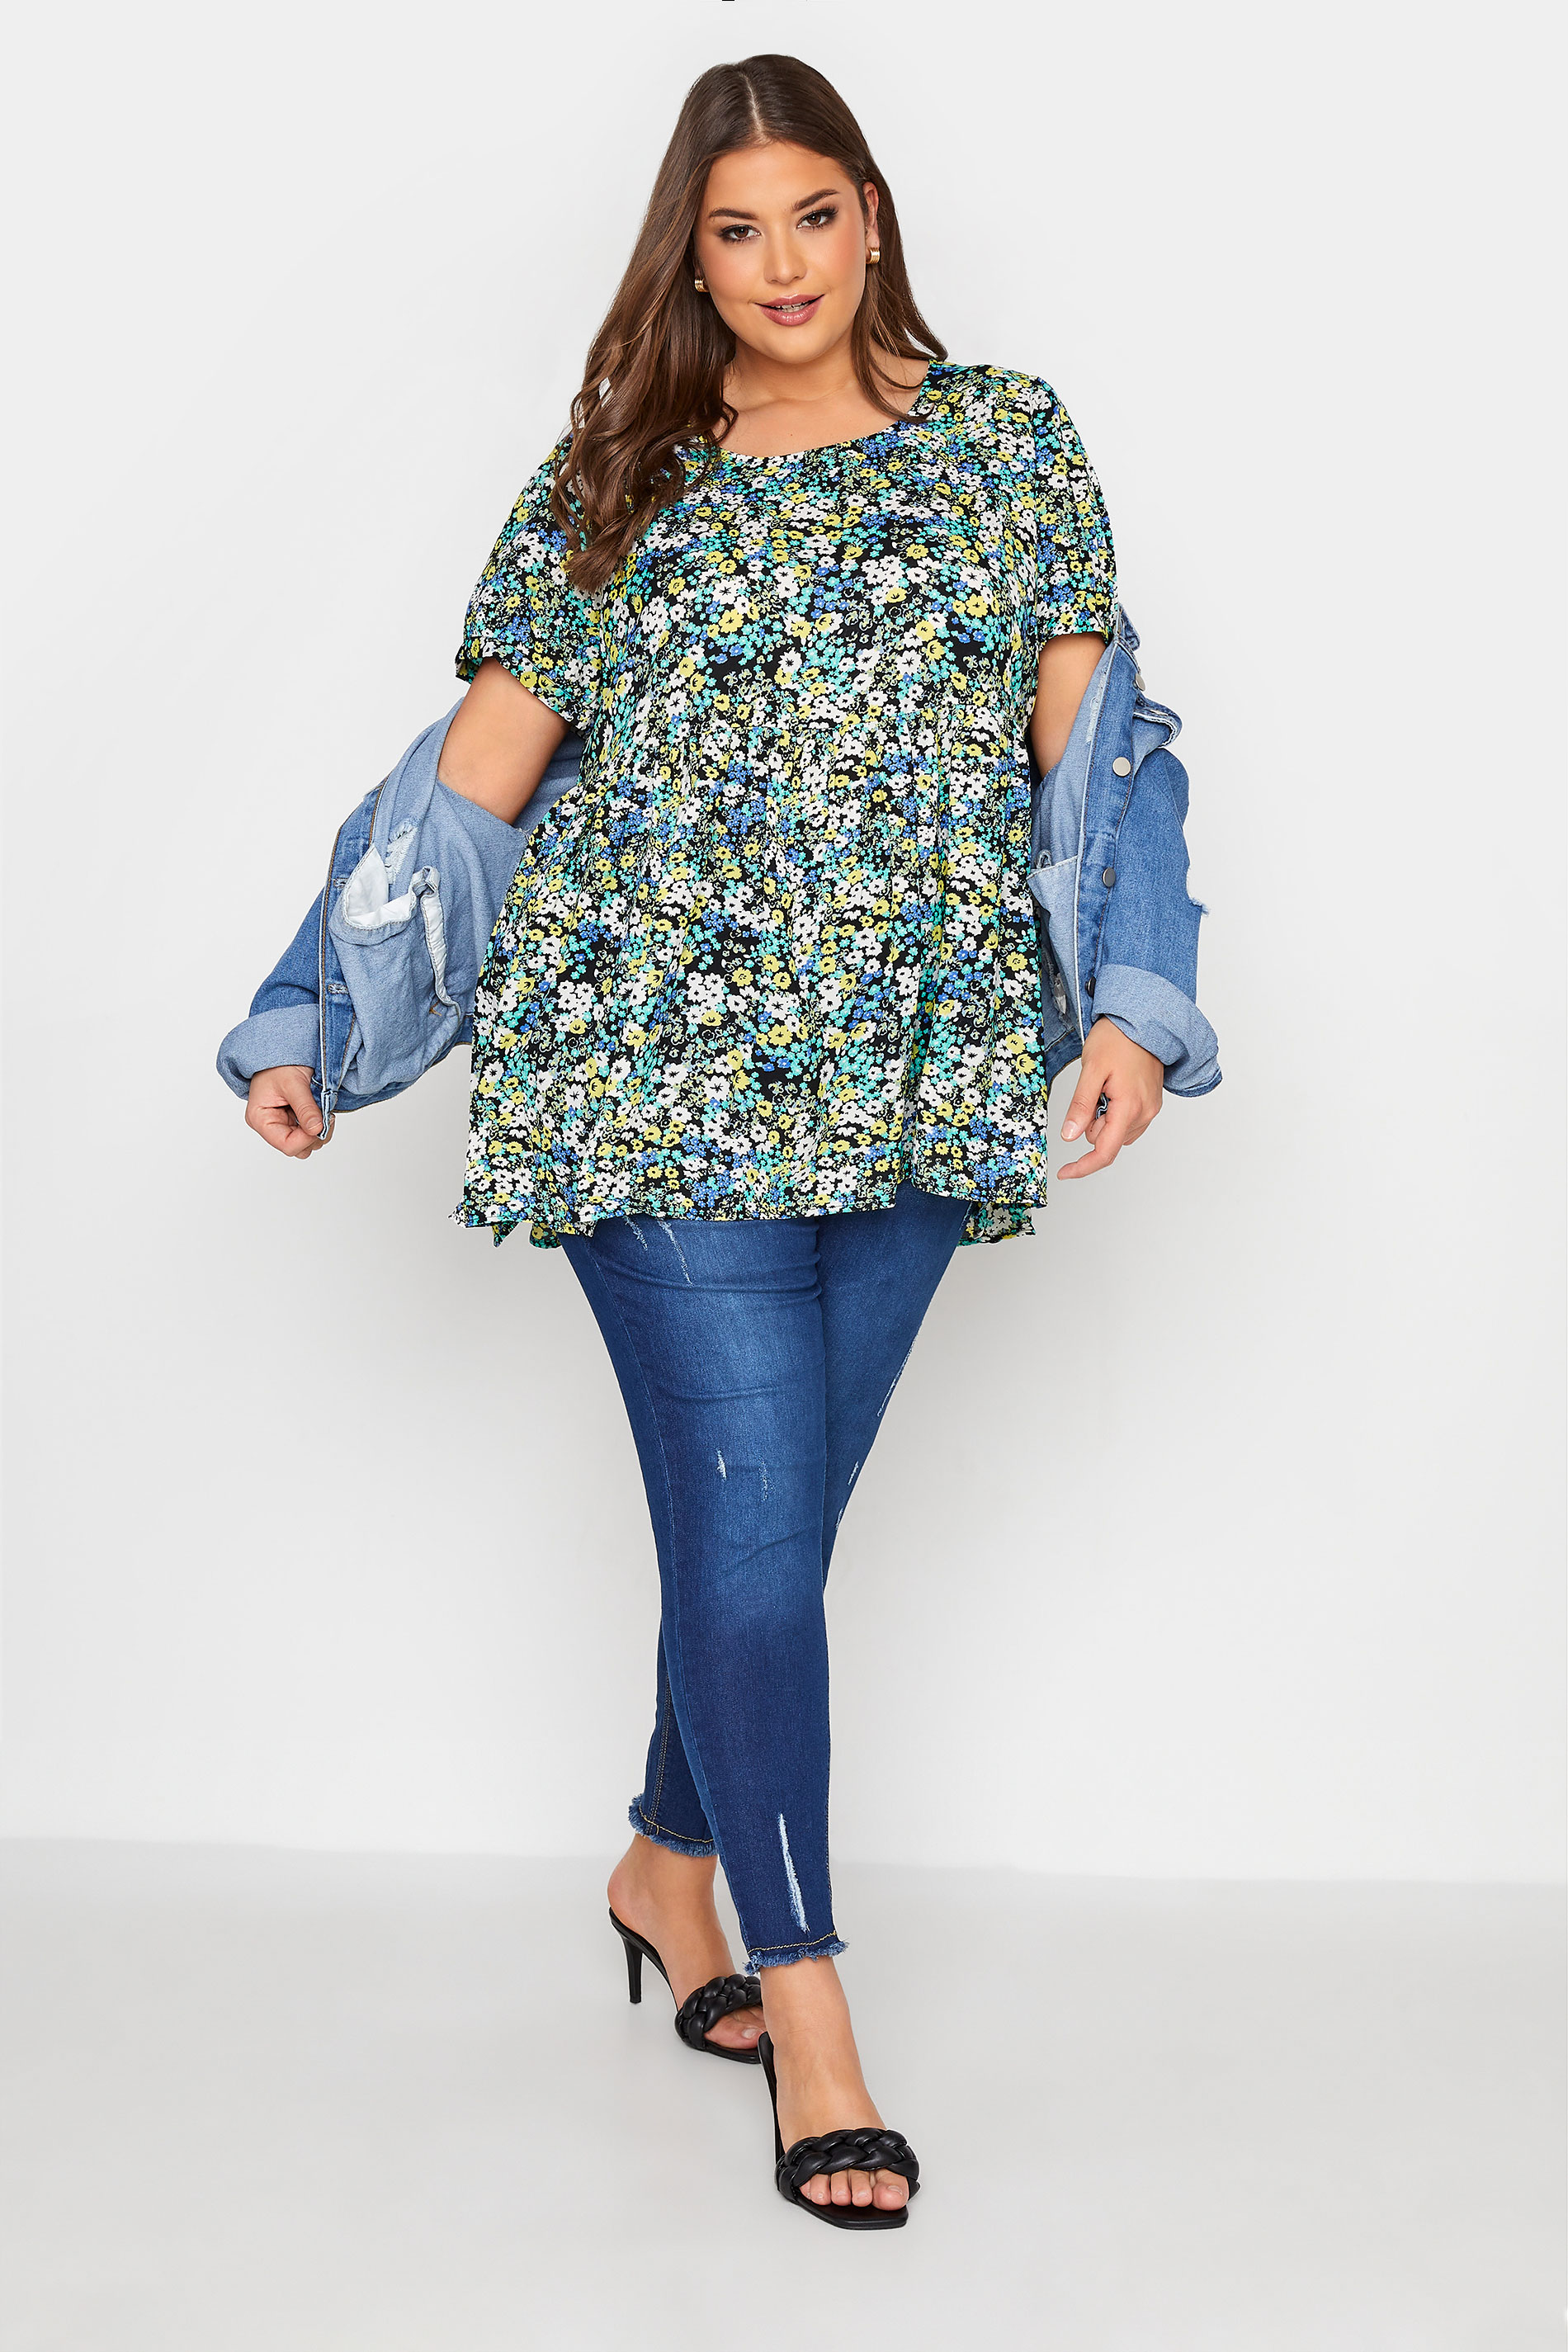 Grande taille  Tops Grande taille  Tops Jersey | Top Vert Imprimé Floral Manches Bouffantes - VW34568